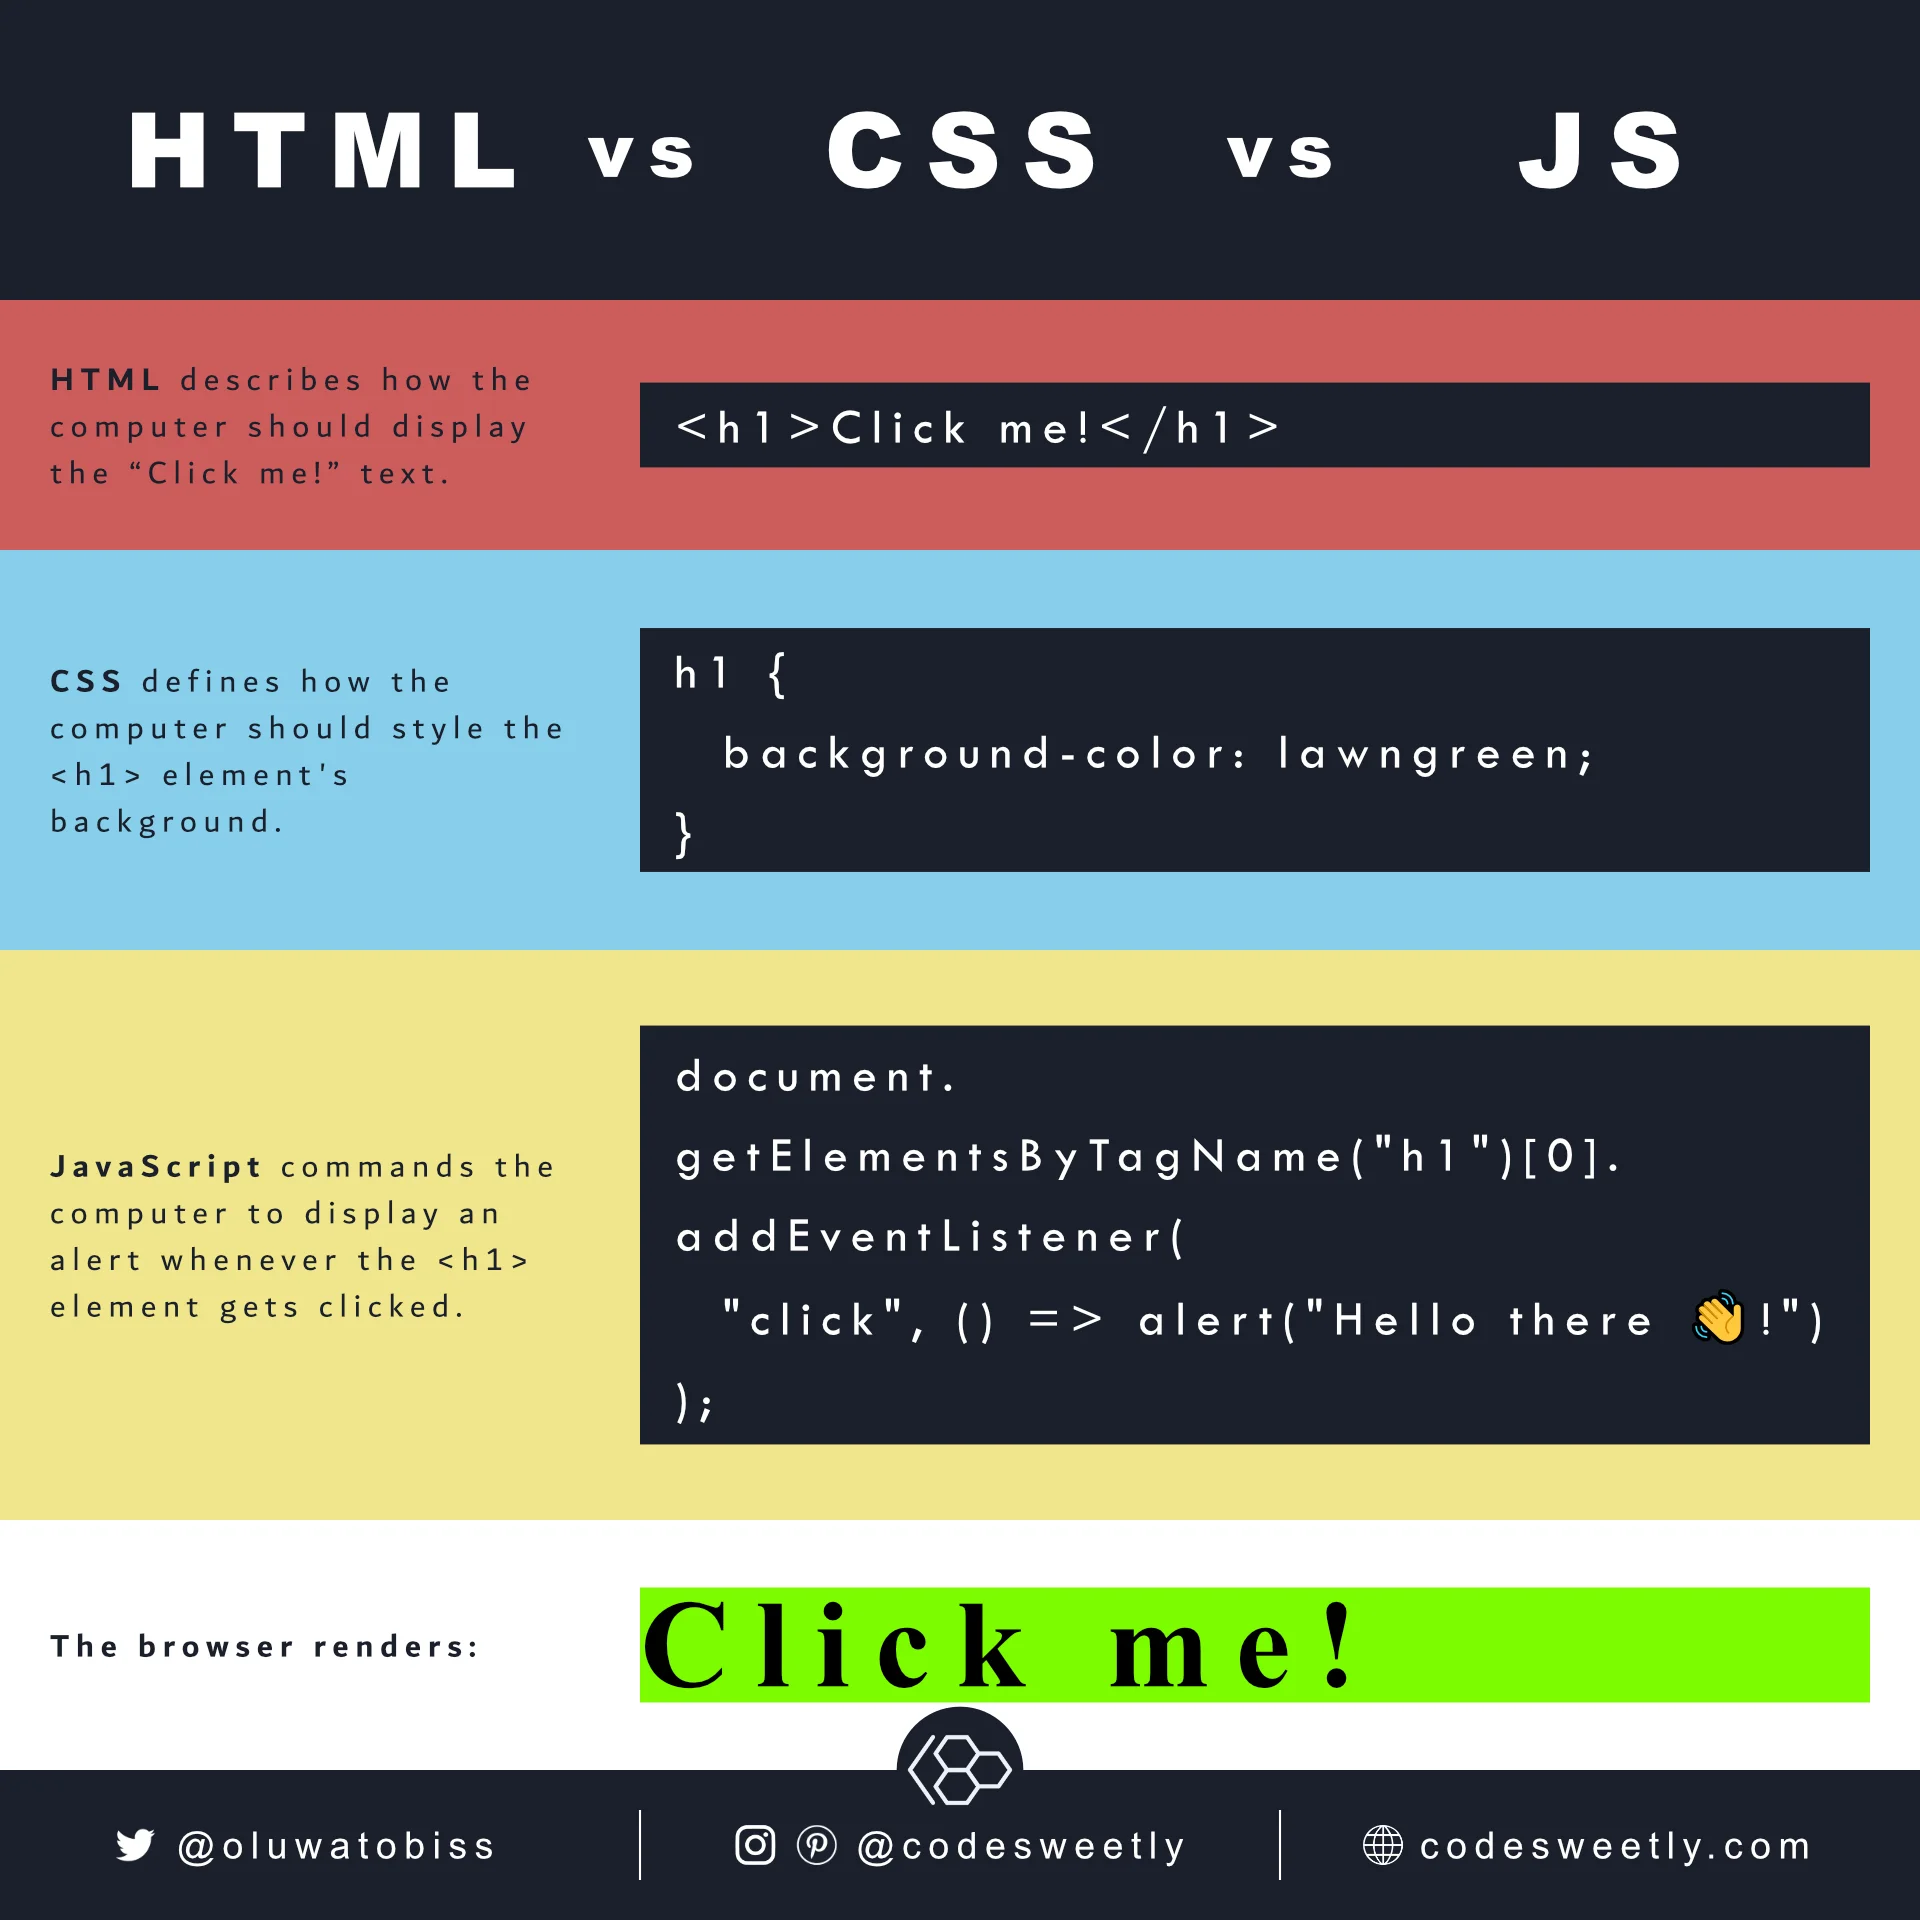 HTML annotates content. CSS defines an element's style. JavaScript programs an item's actions